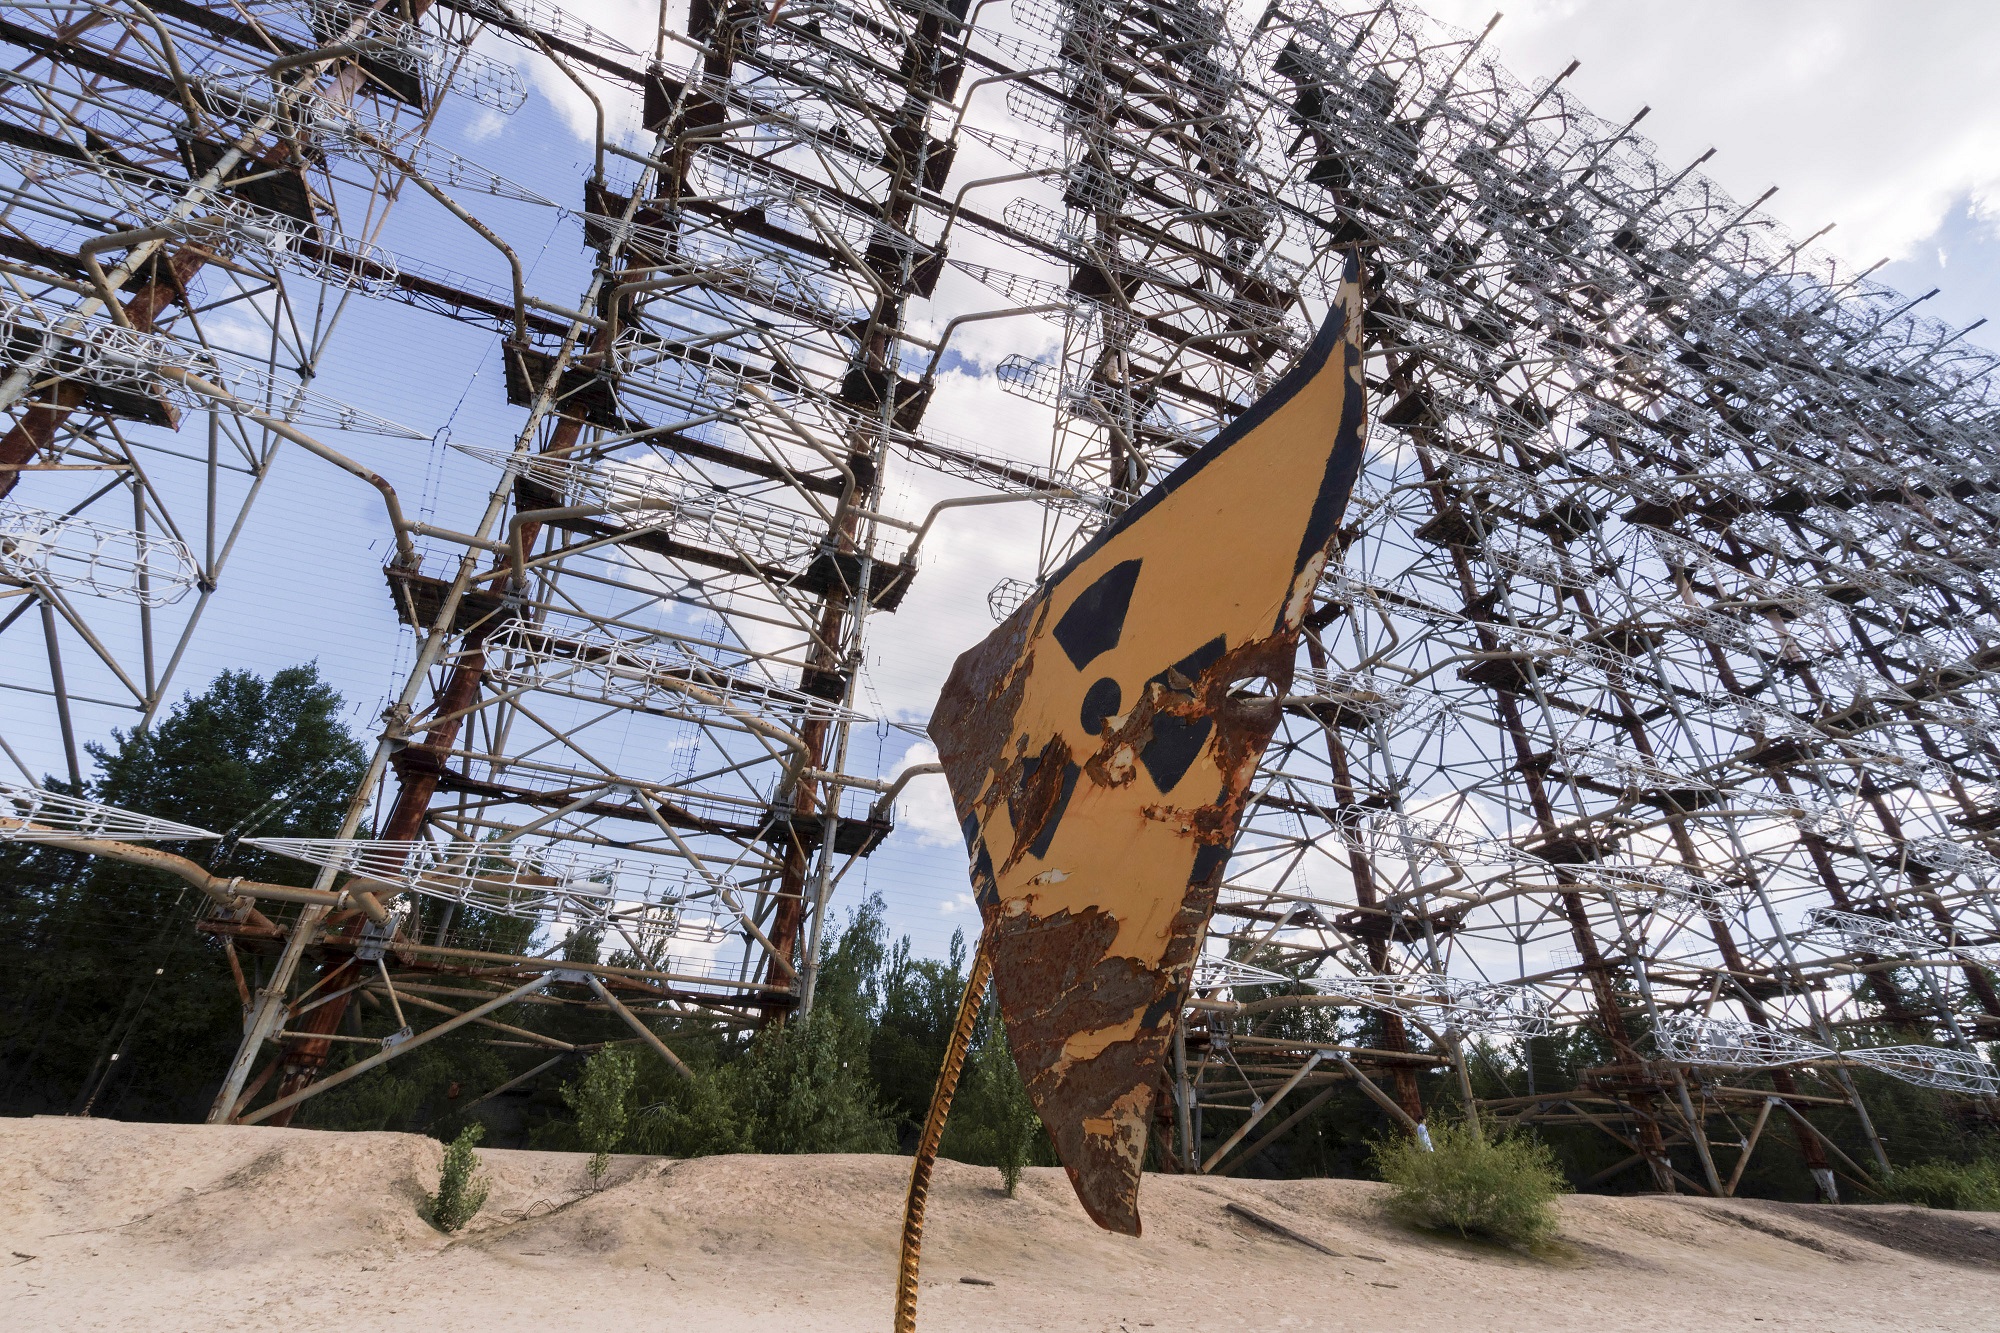 A rusty radioactivity warning sign sits beneath the inter-ballistic early warning radar system, known as Duga Radar, in the Chernobyl exclusion zone in Chernobyl, Ukraine, on Wednesday, June 19, 2019. (Photo Credit: Vincent Mundy/Bloomberg via Getty Images)